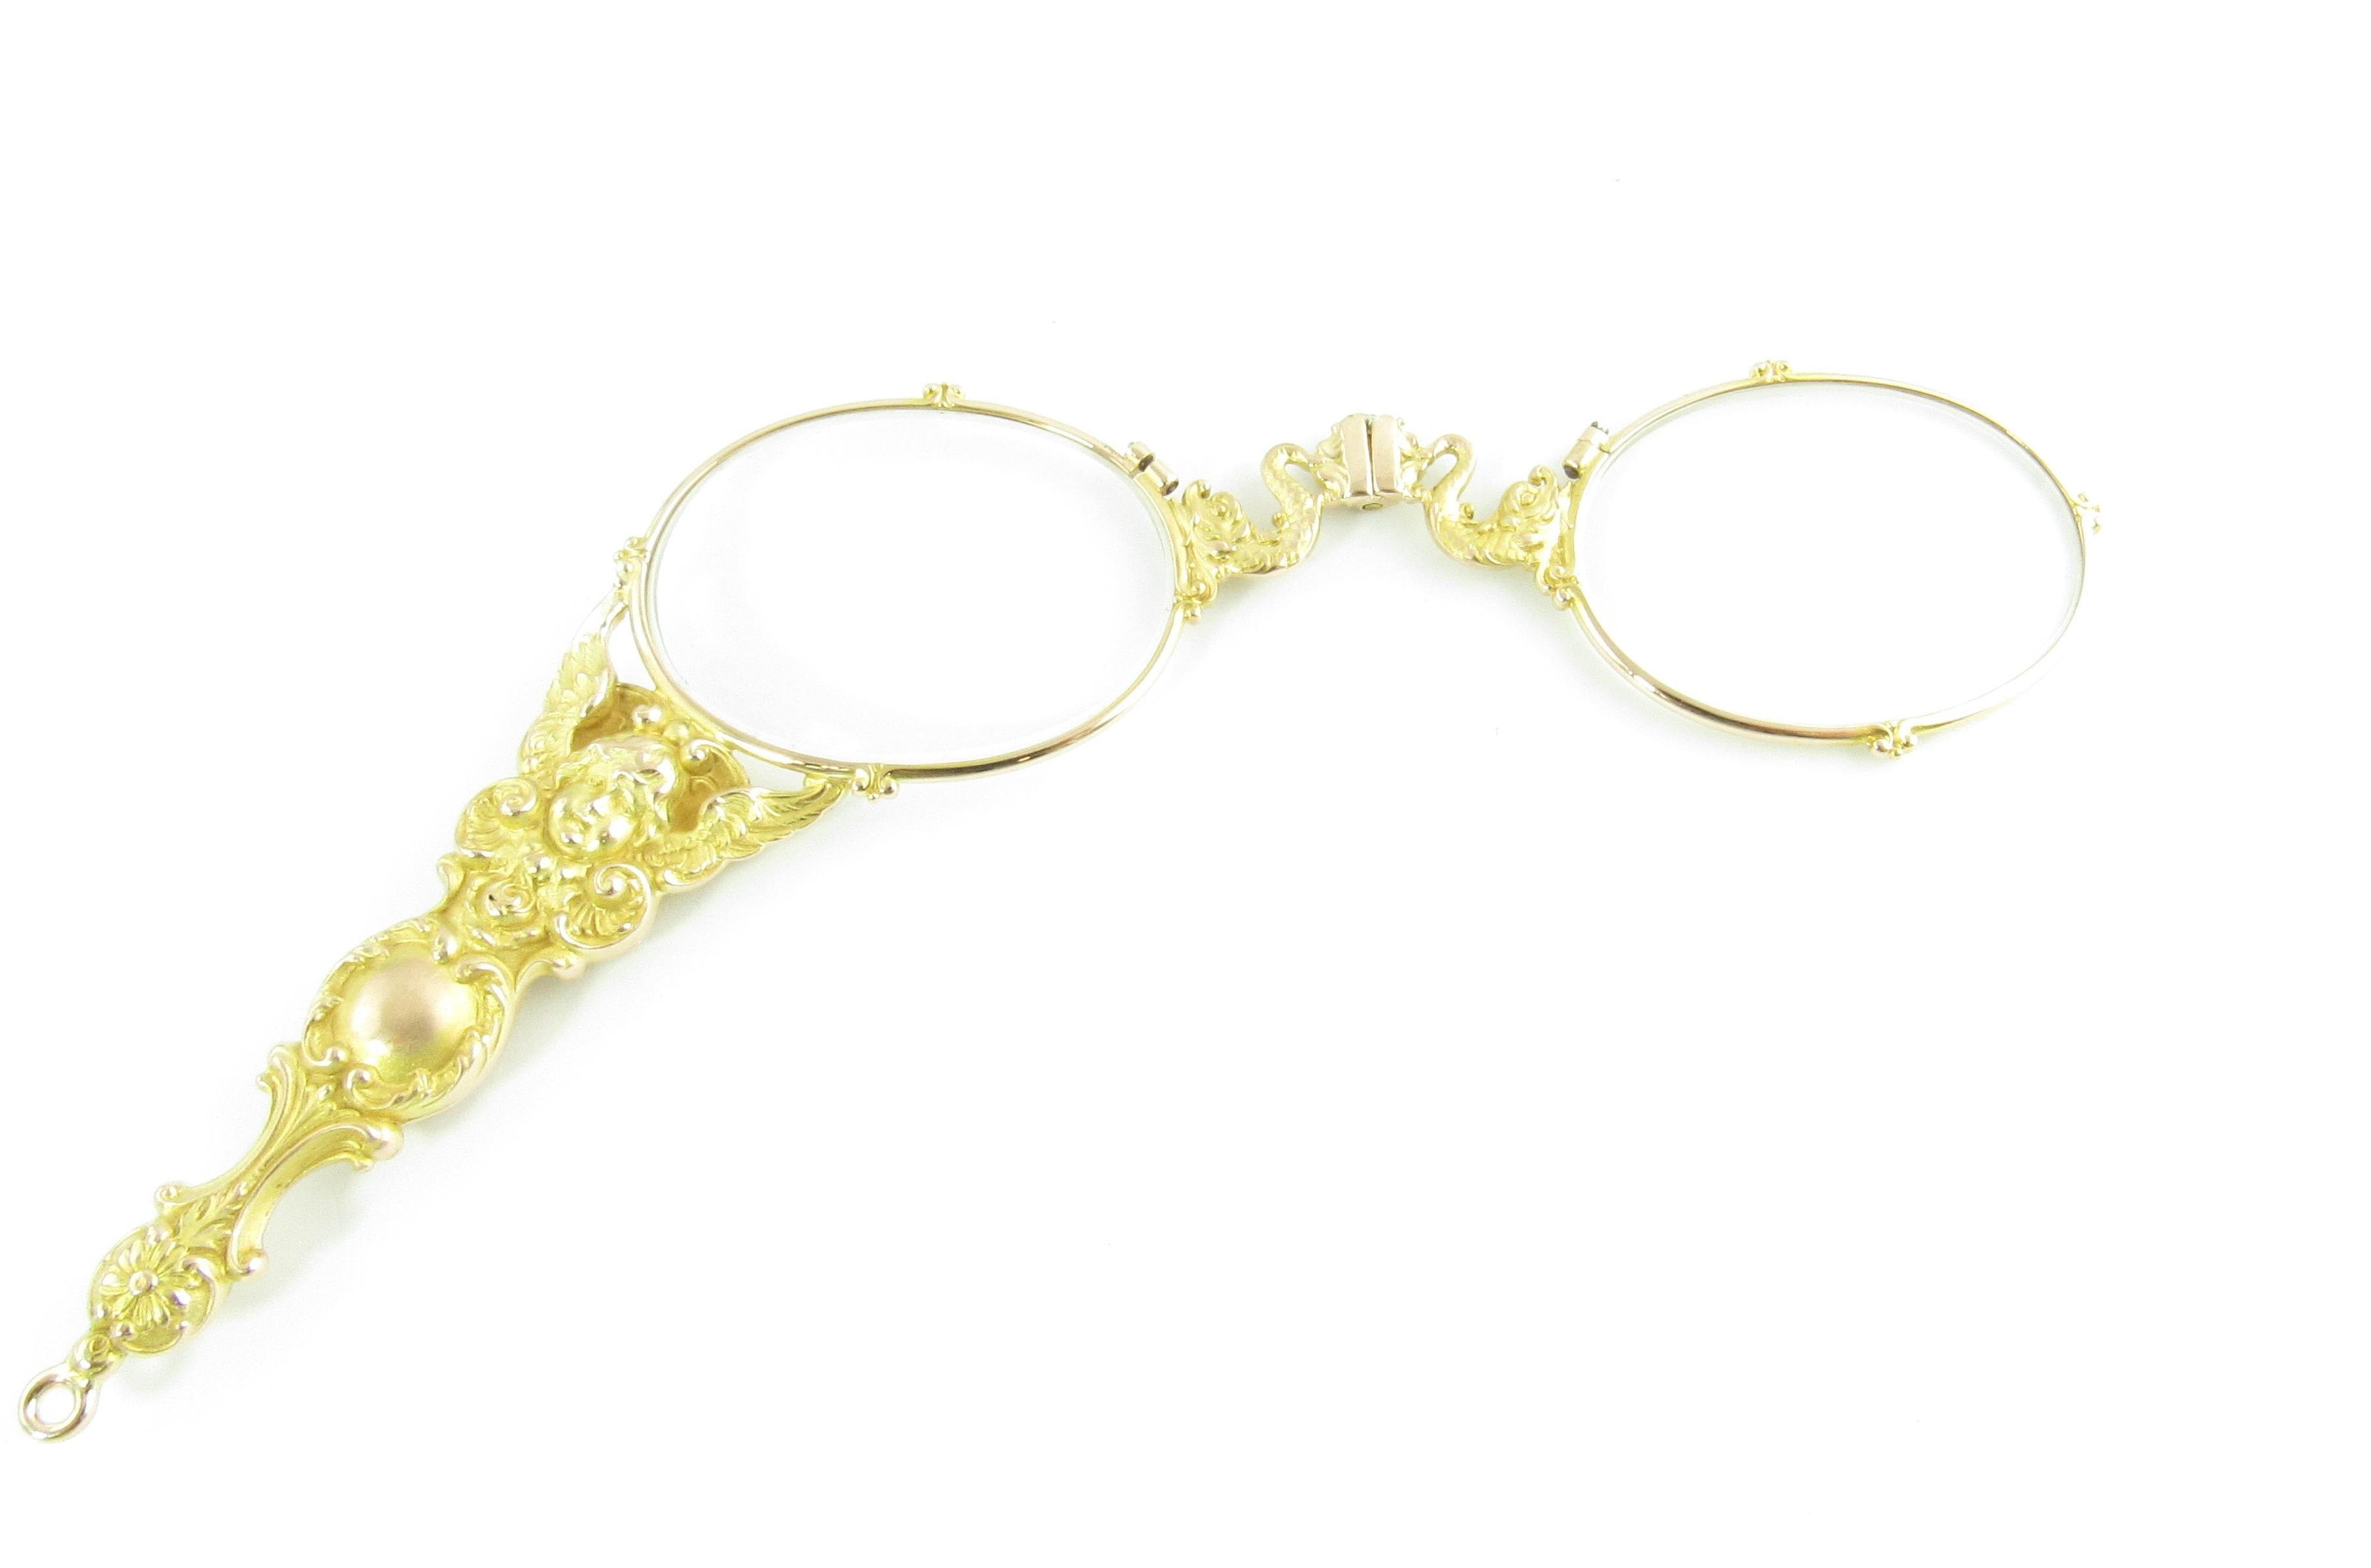 Antique Victorian 14 Karat Yellow Gold Opera Glasses

This gorgeous lorgnette features folding frames and exquisitely detailed handle and bridge. Frame measures 3.9 inches across. Each lens measures 42 mm. Handle measures 57 mm.

Size: 57 mm